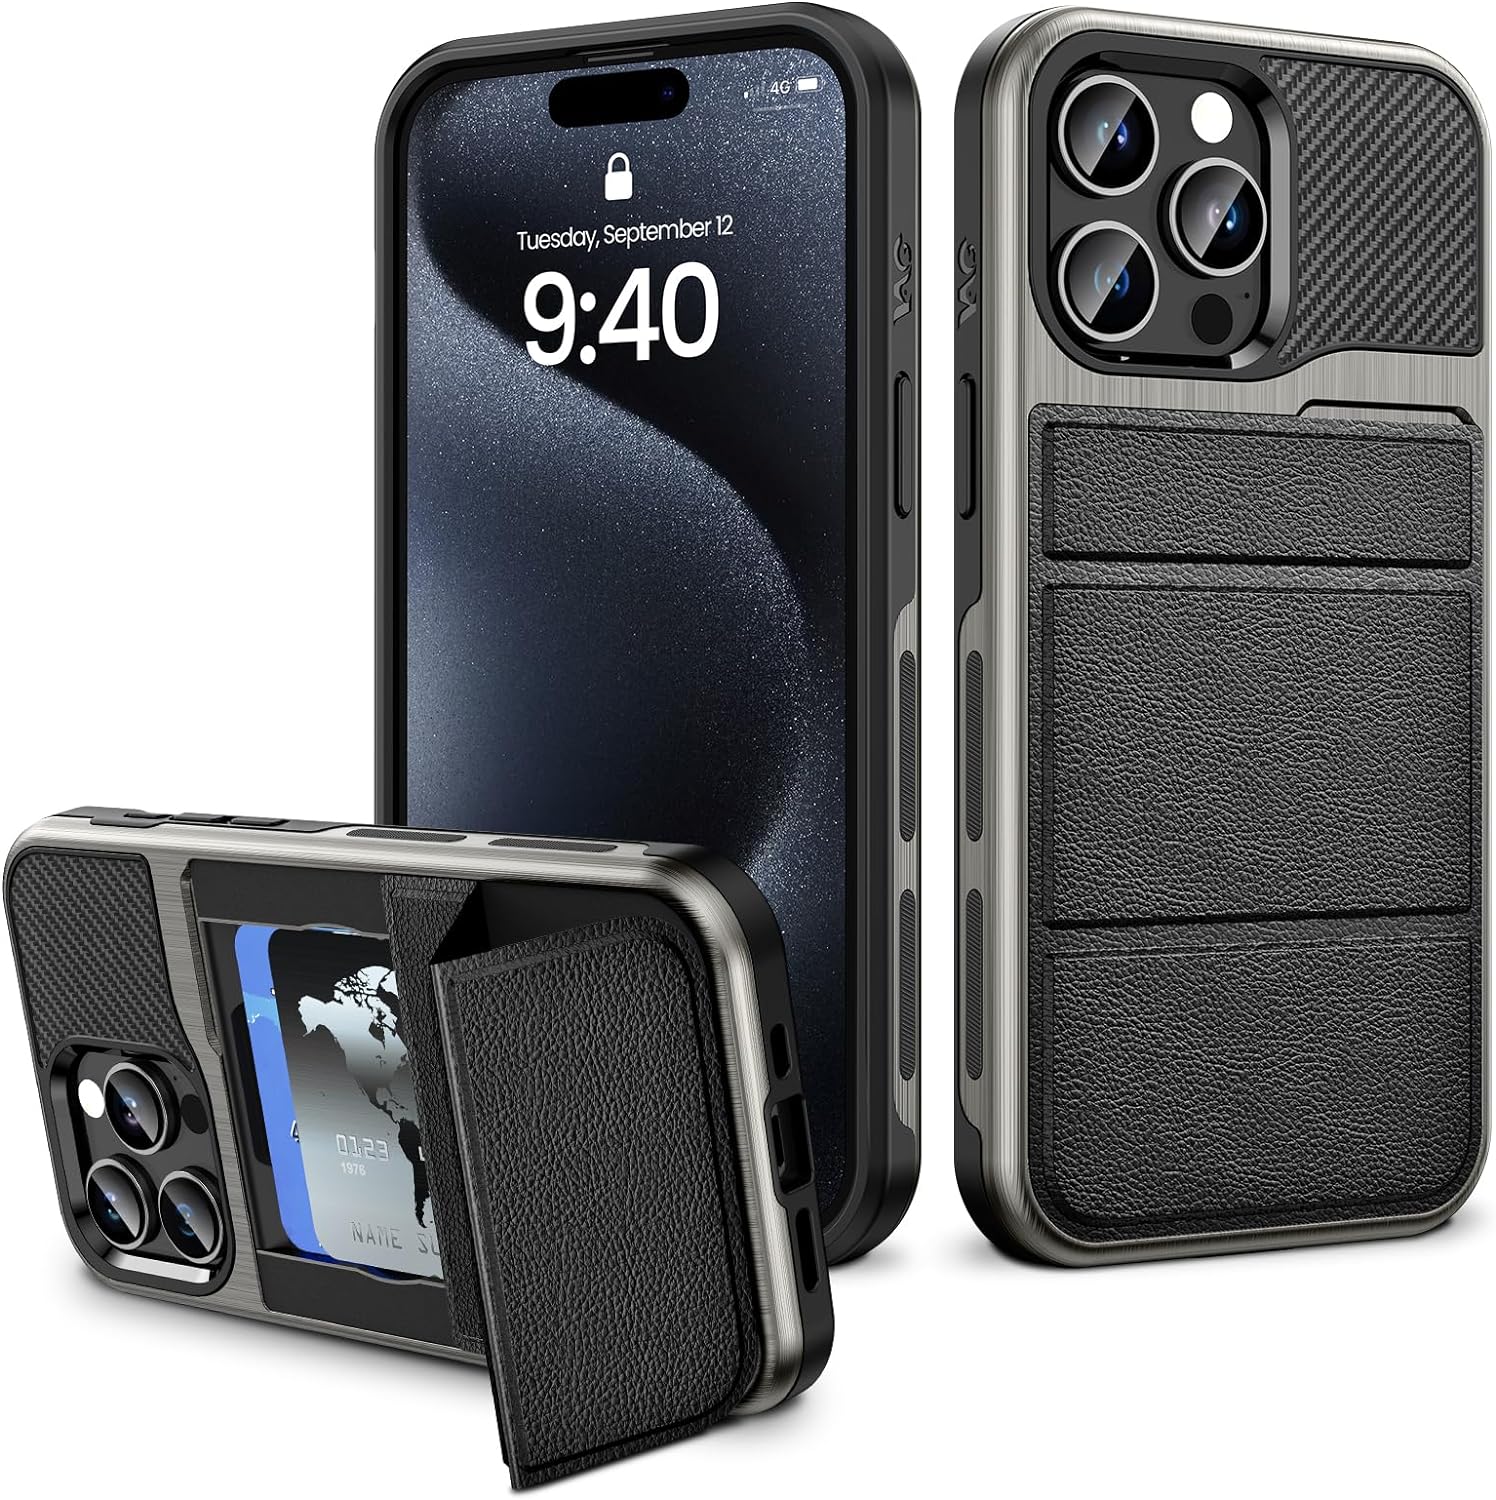 7 Best Wallet Cases for iPhone 15 Pro - Guiding Tech